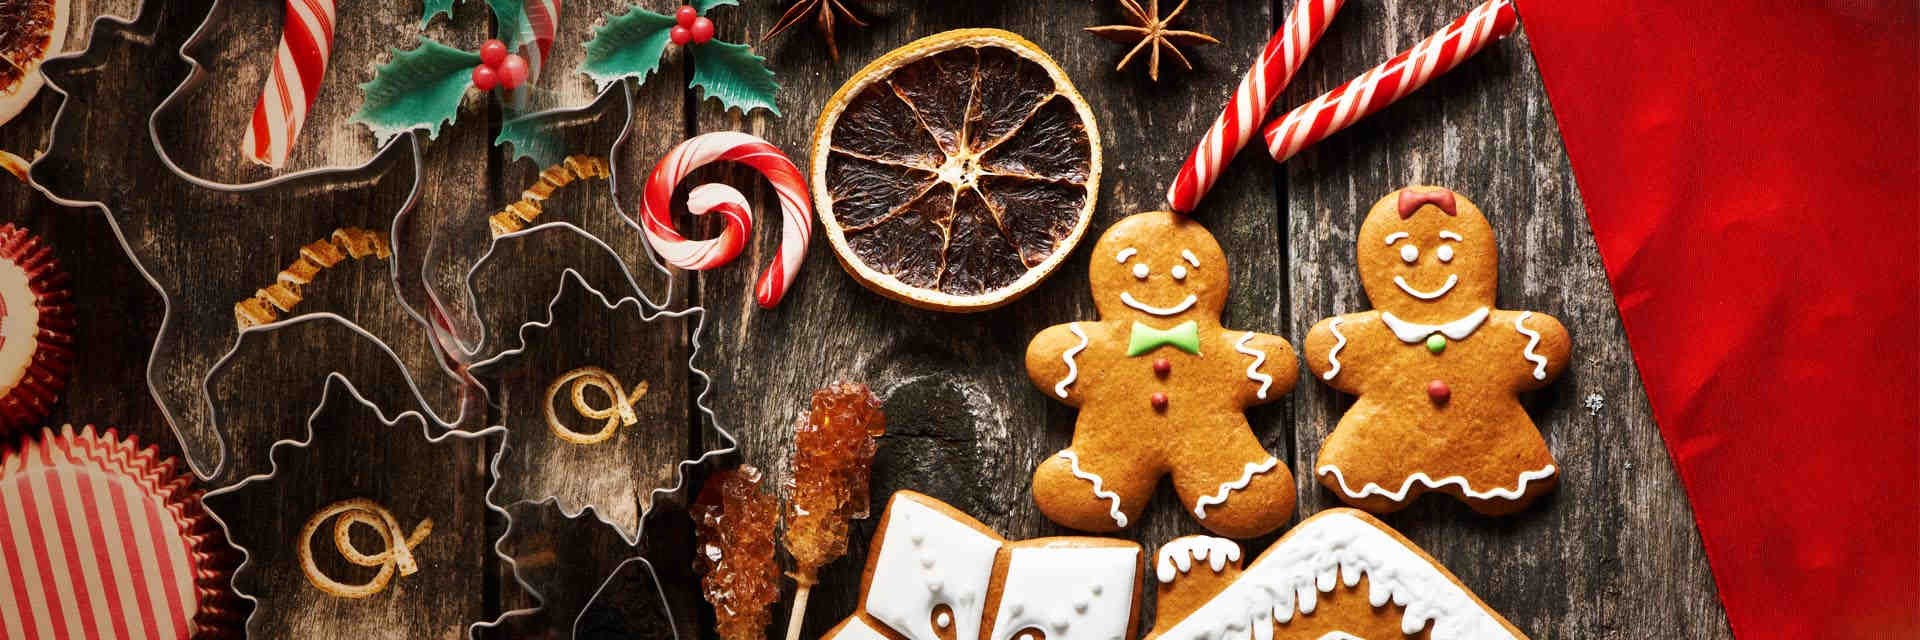 Gingerbread people, candy canes and holly on a wooden table